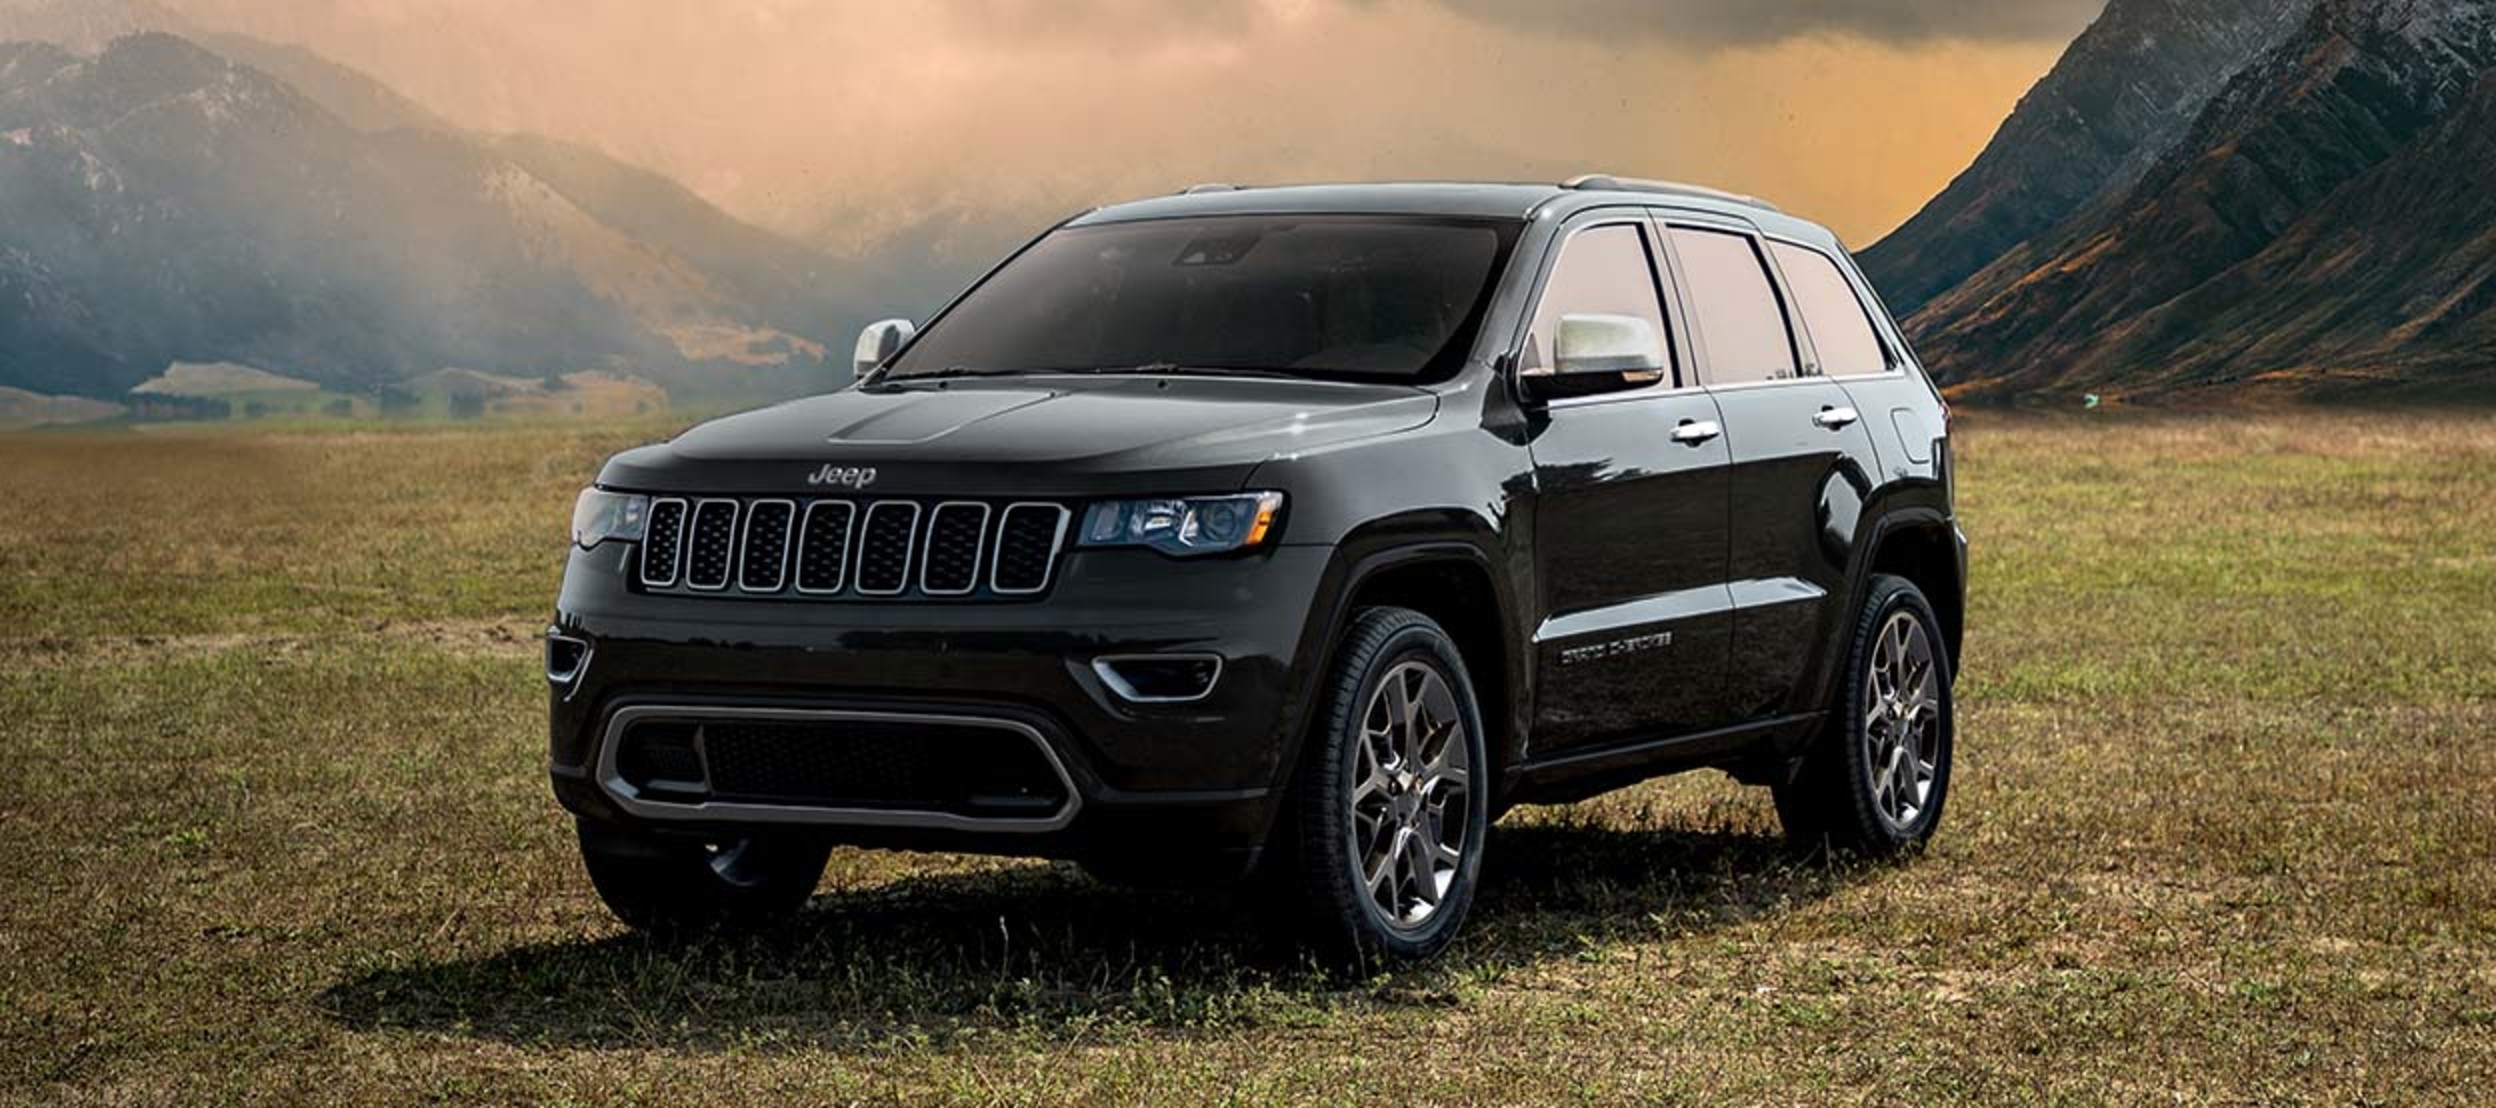 A grey 2022 Grand Cherokee WK parked in an open grass field with mountains in the background